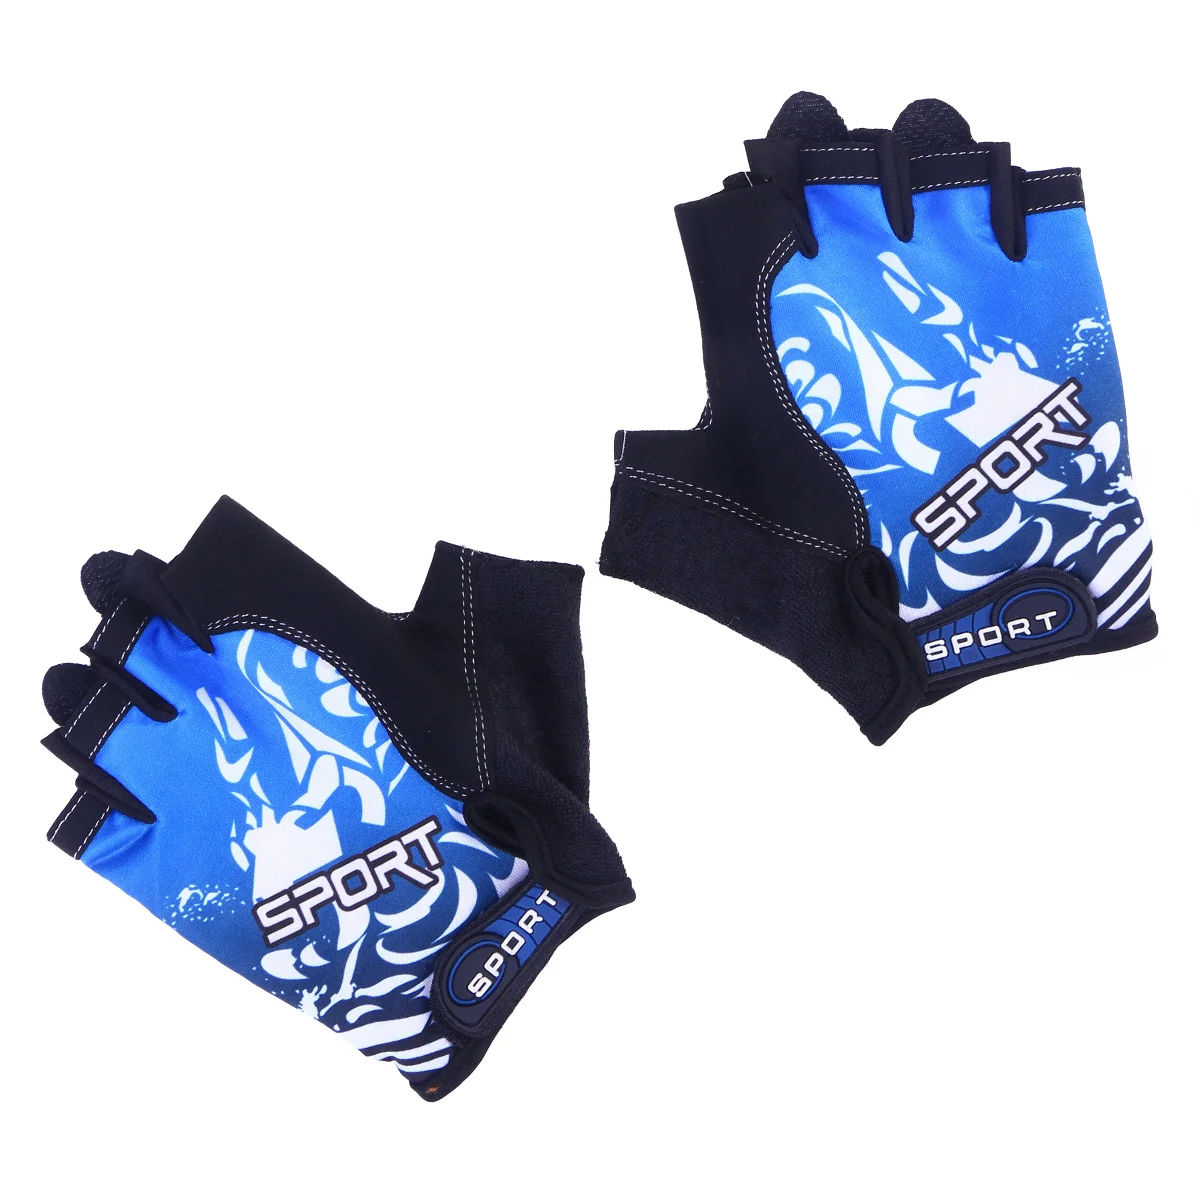 1 Pair Outdoor Sports Half Finger Gloves Non-Slip Breathable Workout Gloves for Cycling Climbing Fishing Riding Size M (Blue) esdy esdym 1 outdoor climbing cycling anti slip breathable full finger tactical gloves black m